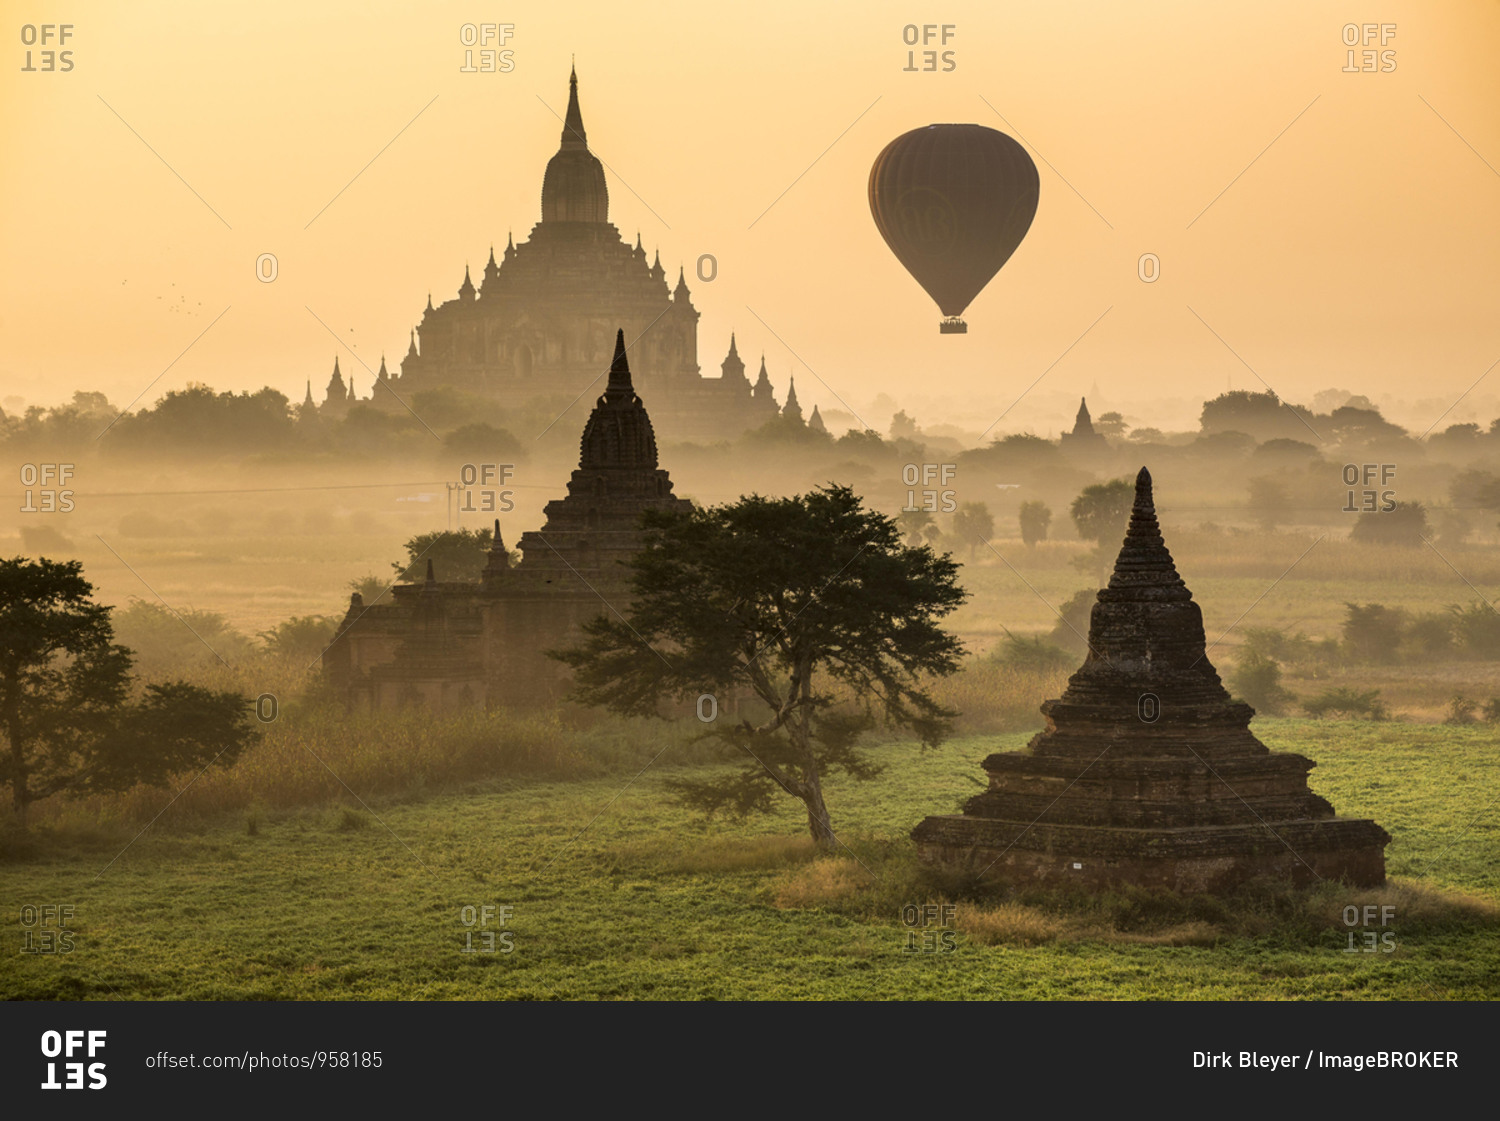 Hot air balloon over the landscape in the early morning fog, Sulamani Temple, stupas, pagodas, temple complex, Plateau of Bagan, Mandalay Division, Burma or Myanmar